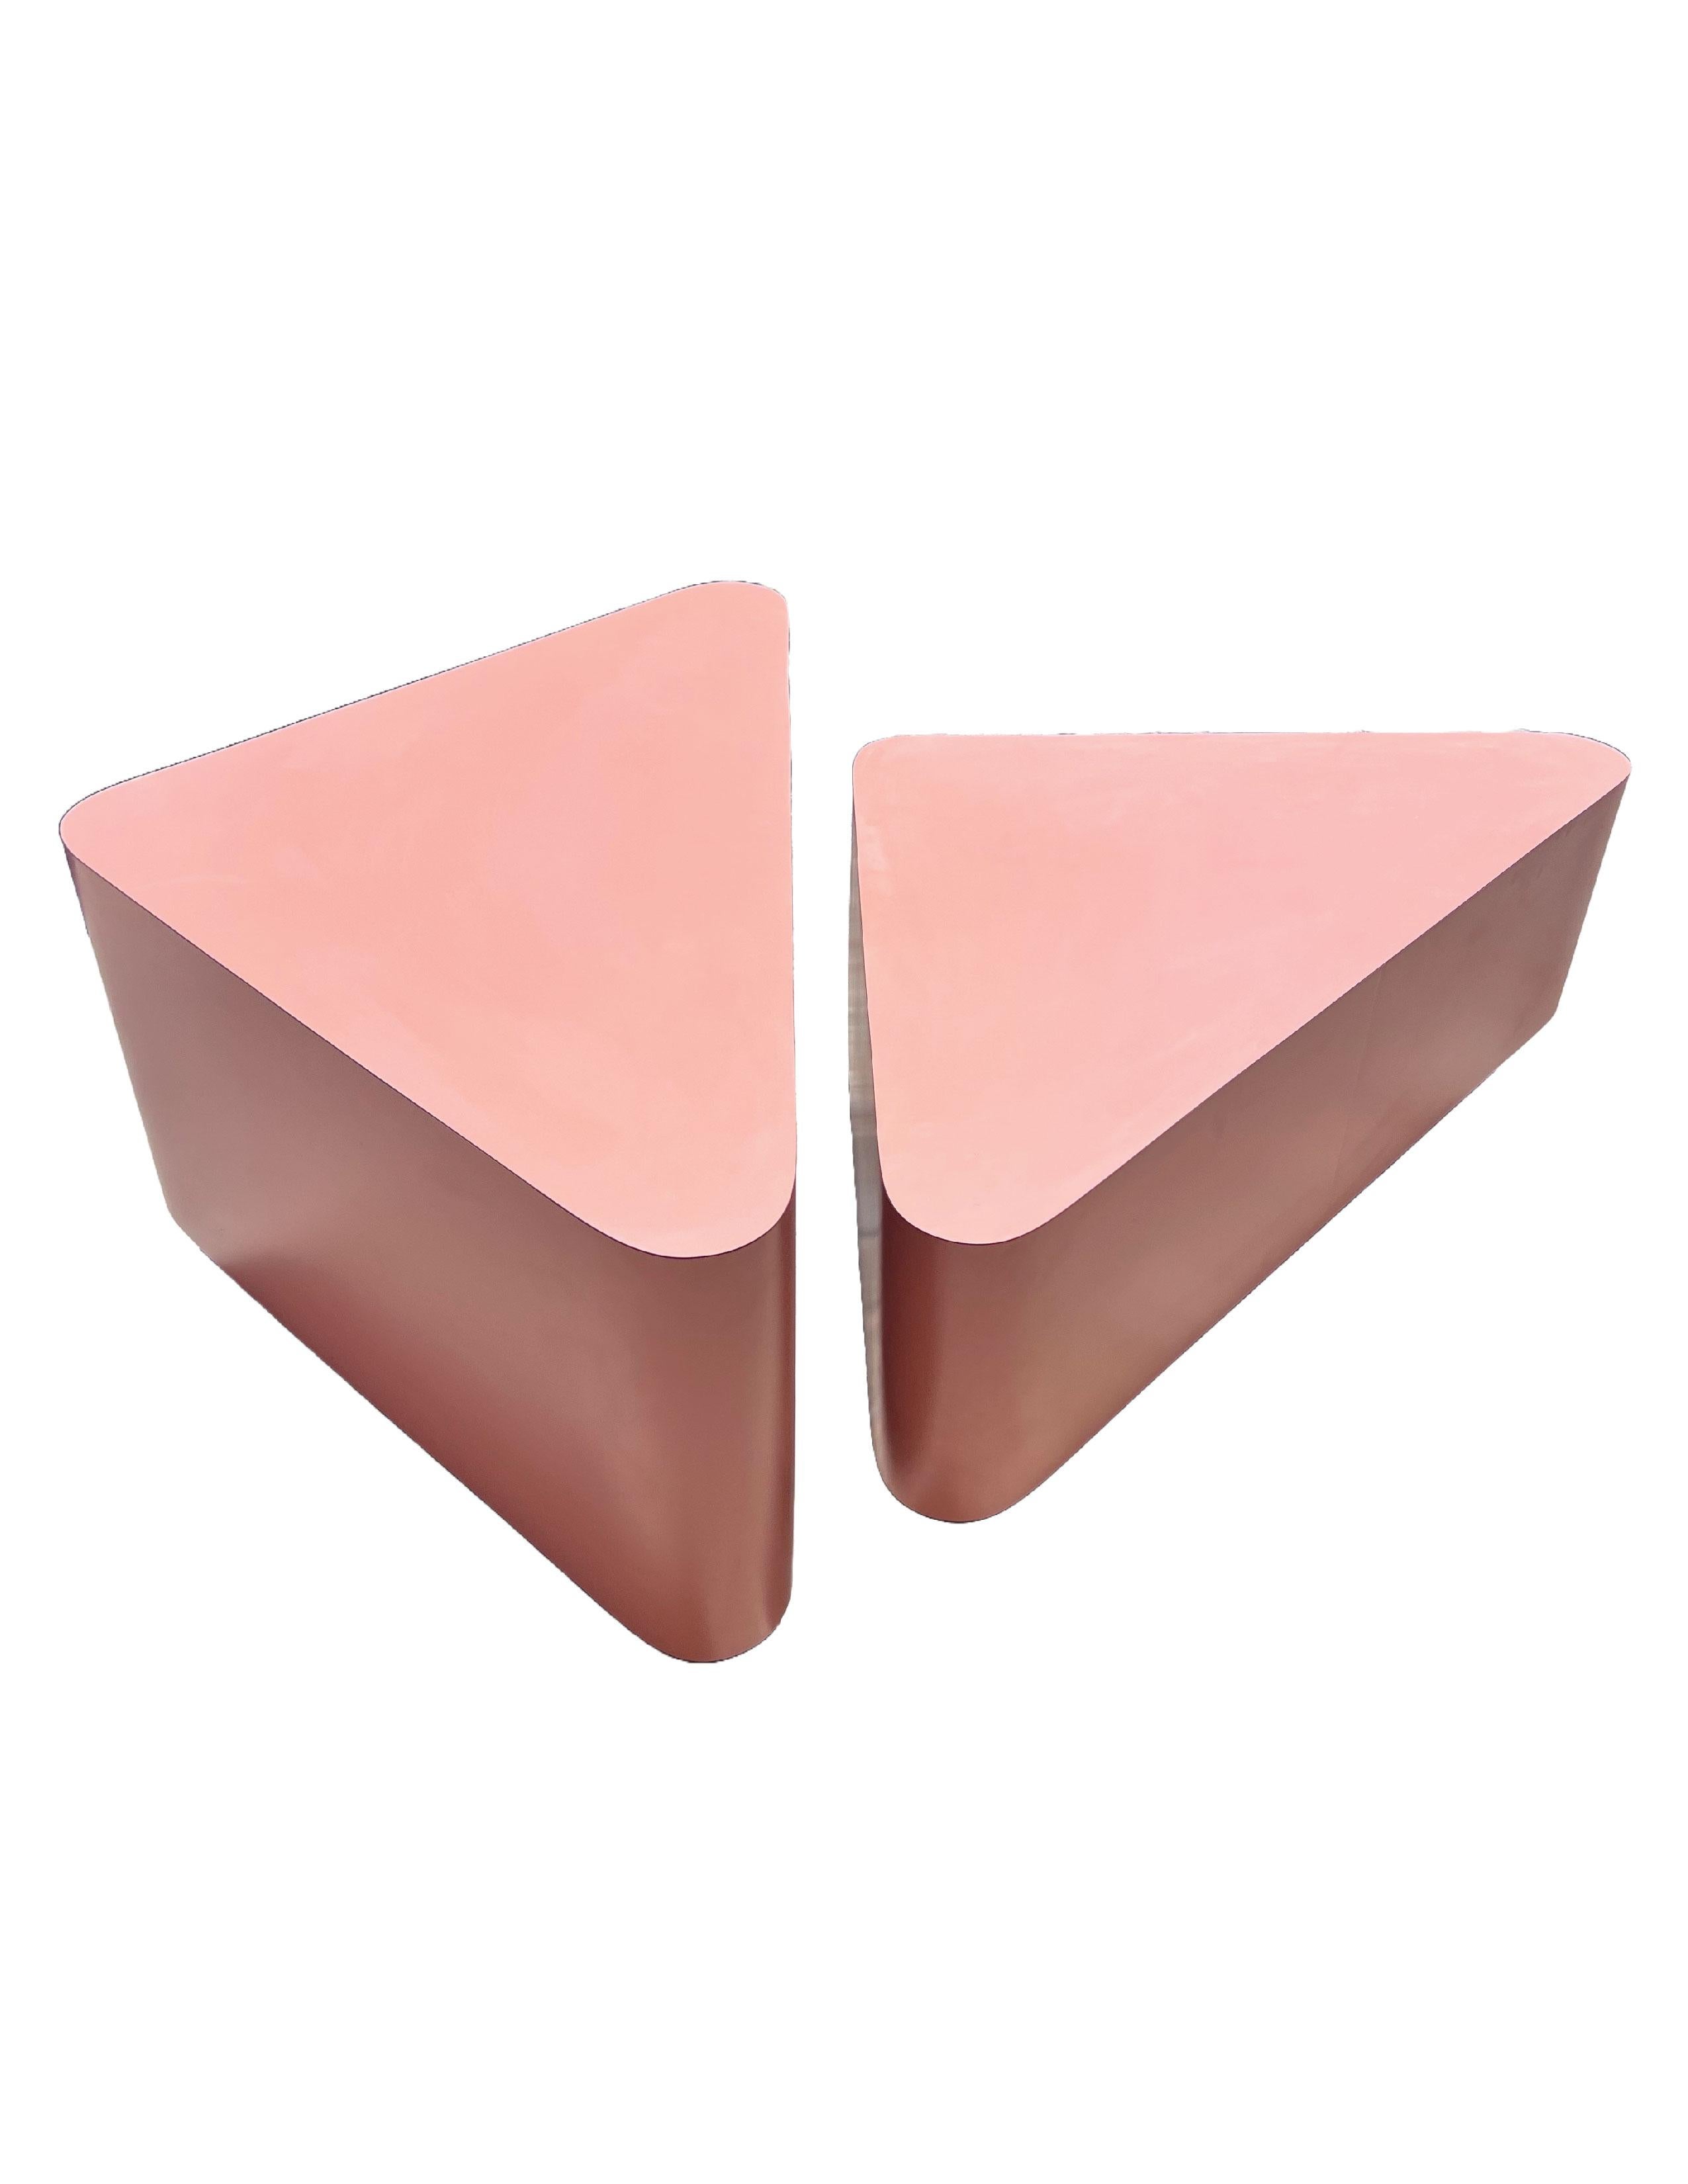 Post-Modern Triangular Postmodern Coffee Table or Side Tables, Mauve or Pink Laminate, Large